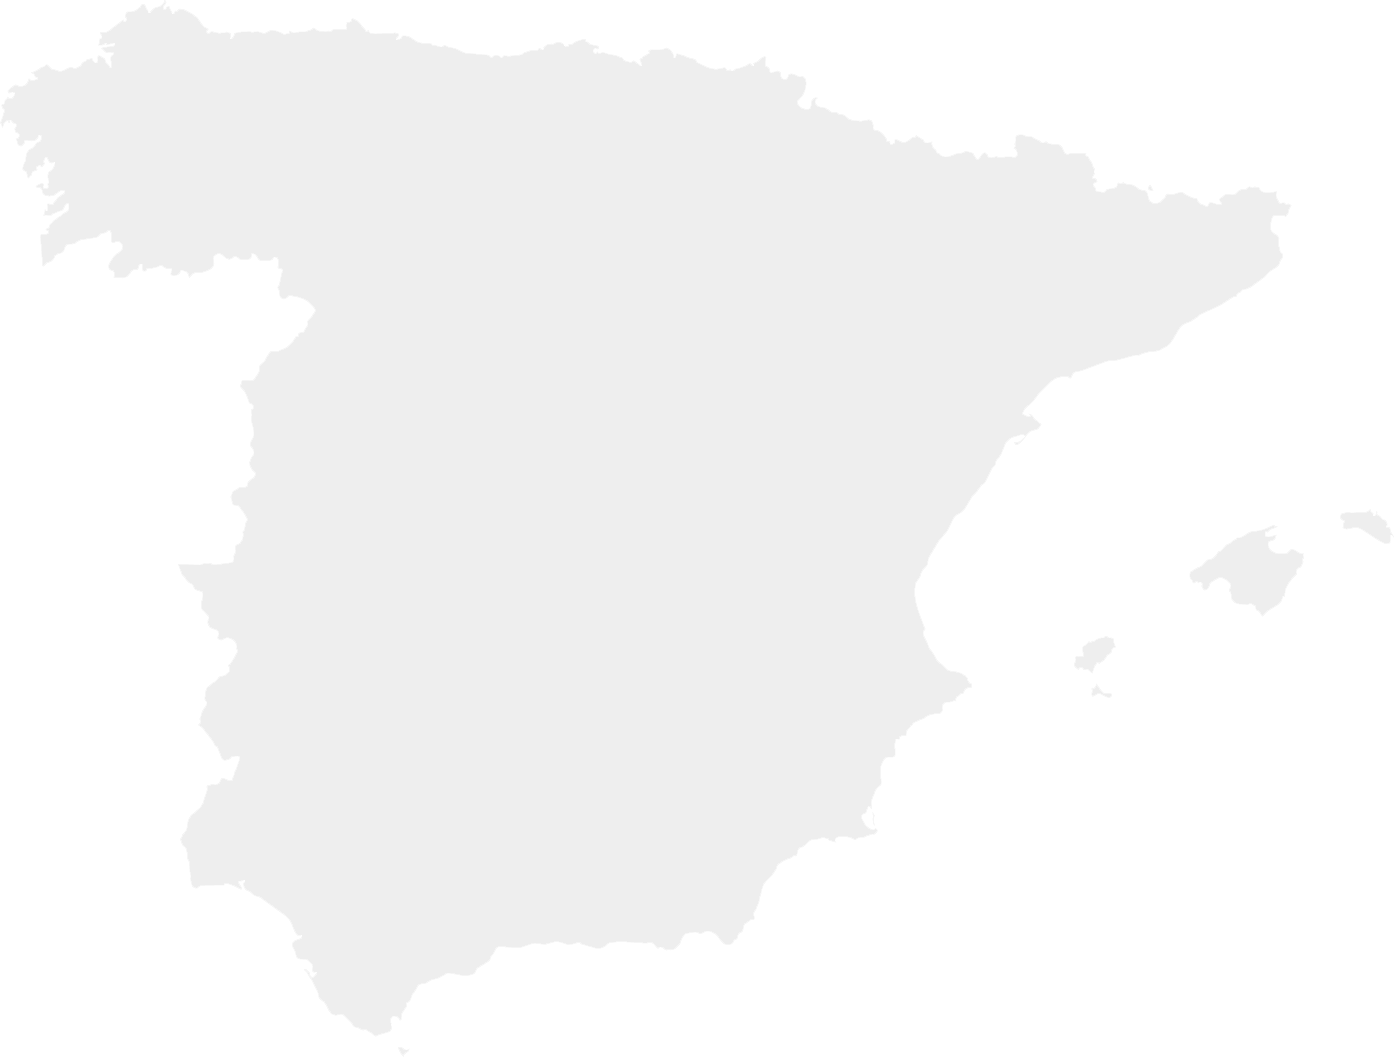 Spain Outline Map